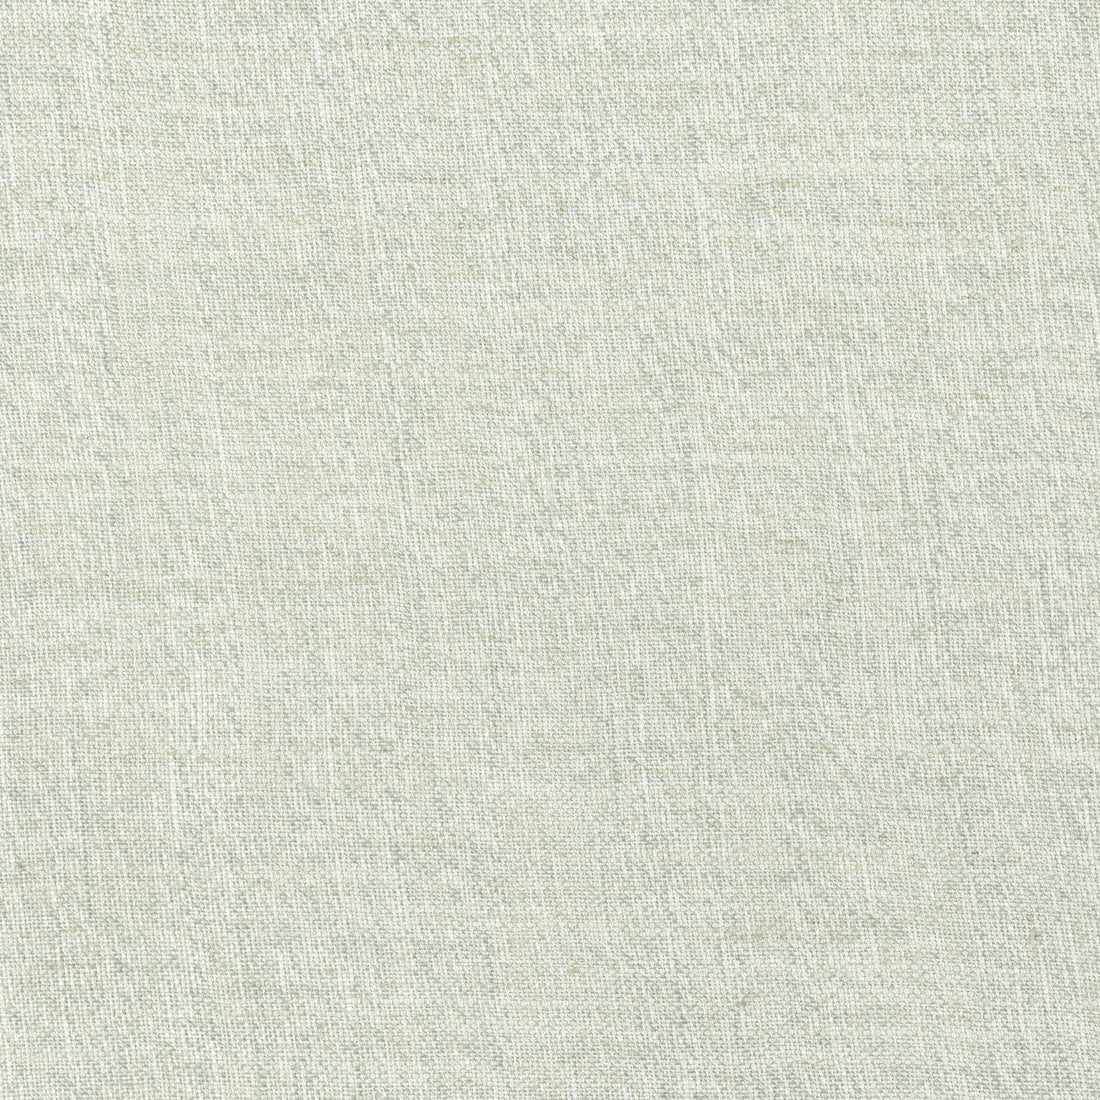 Terra Linen fabric in sage color - pattern number FWW7691 - by Thibaut in the Palisades collection